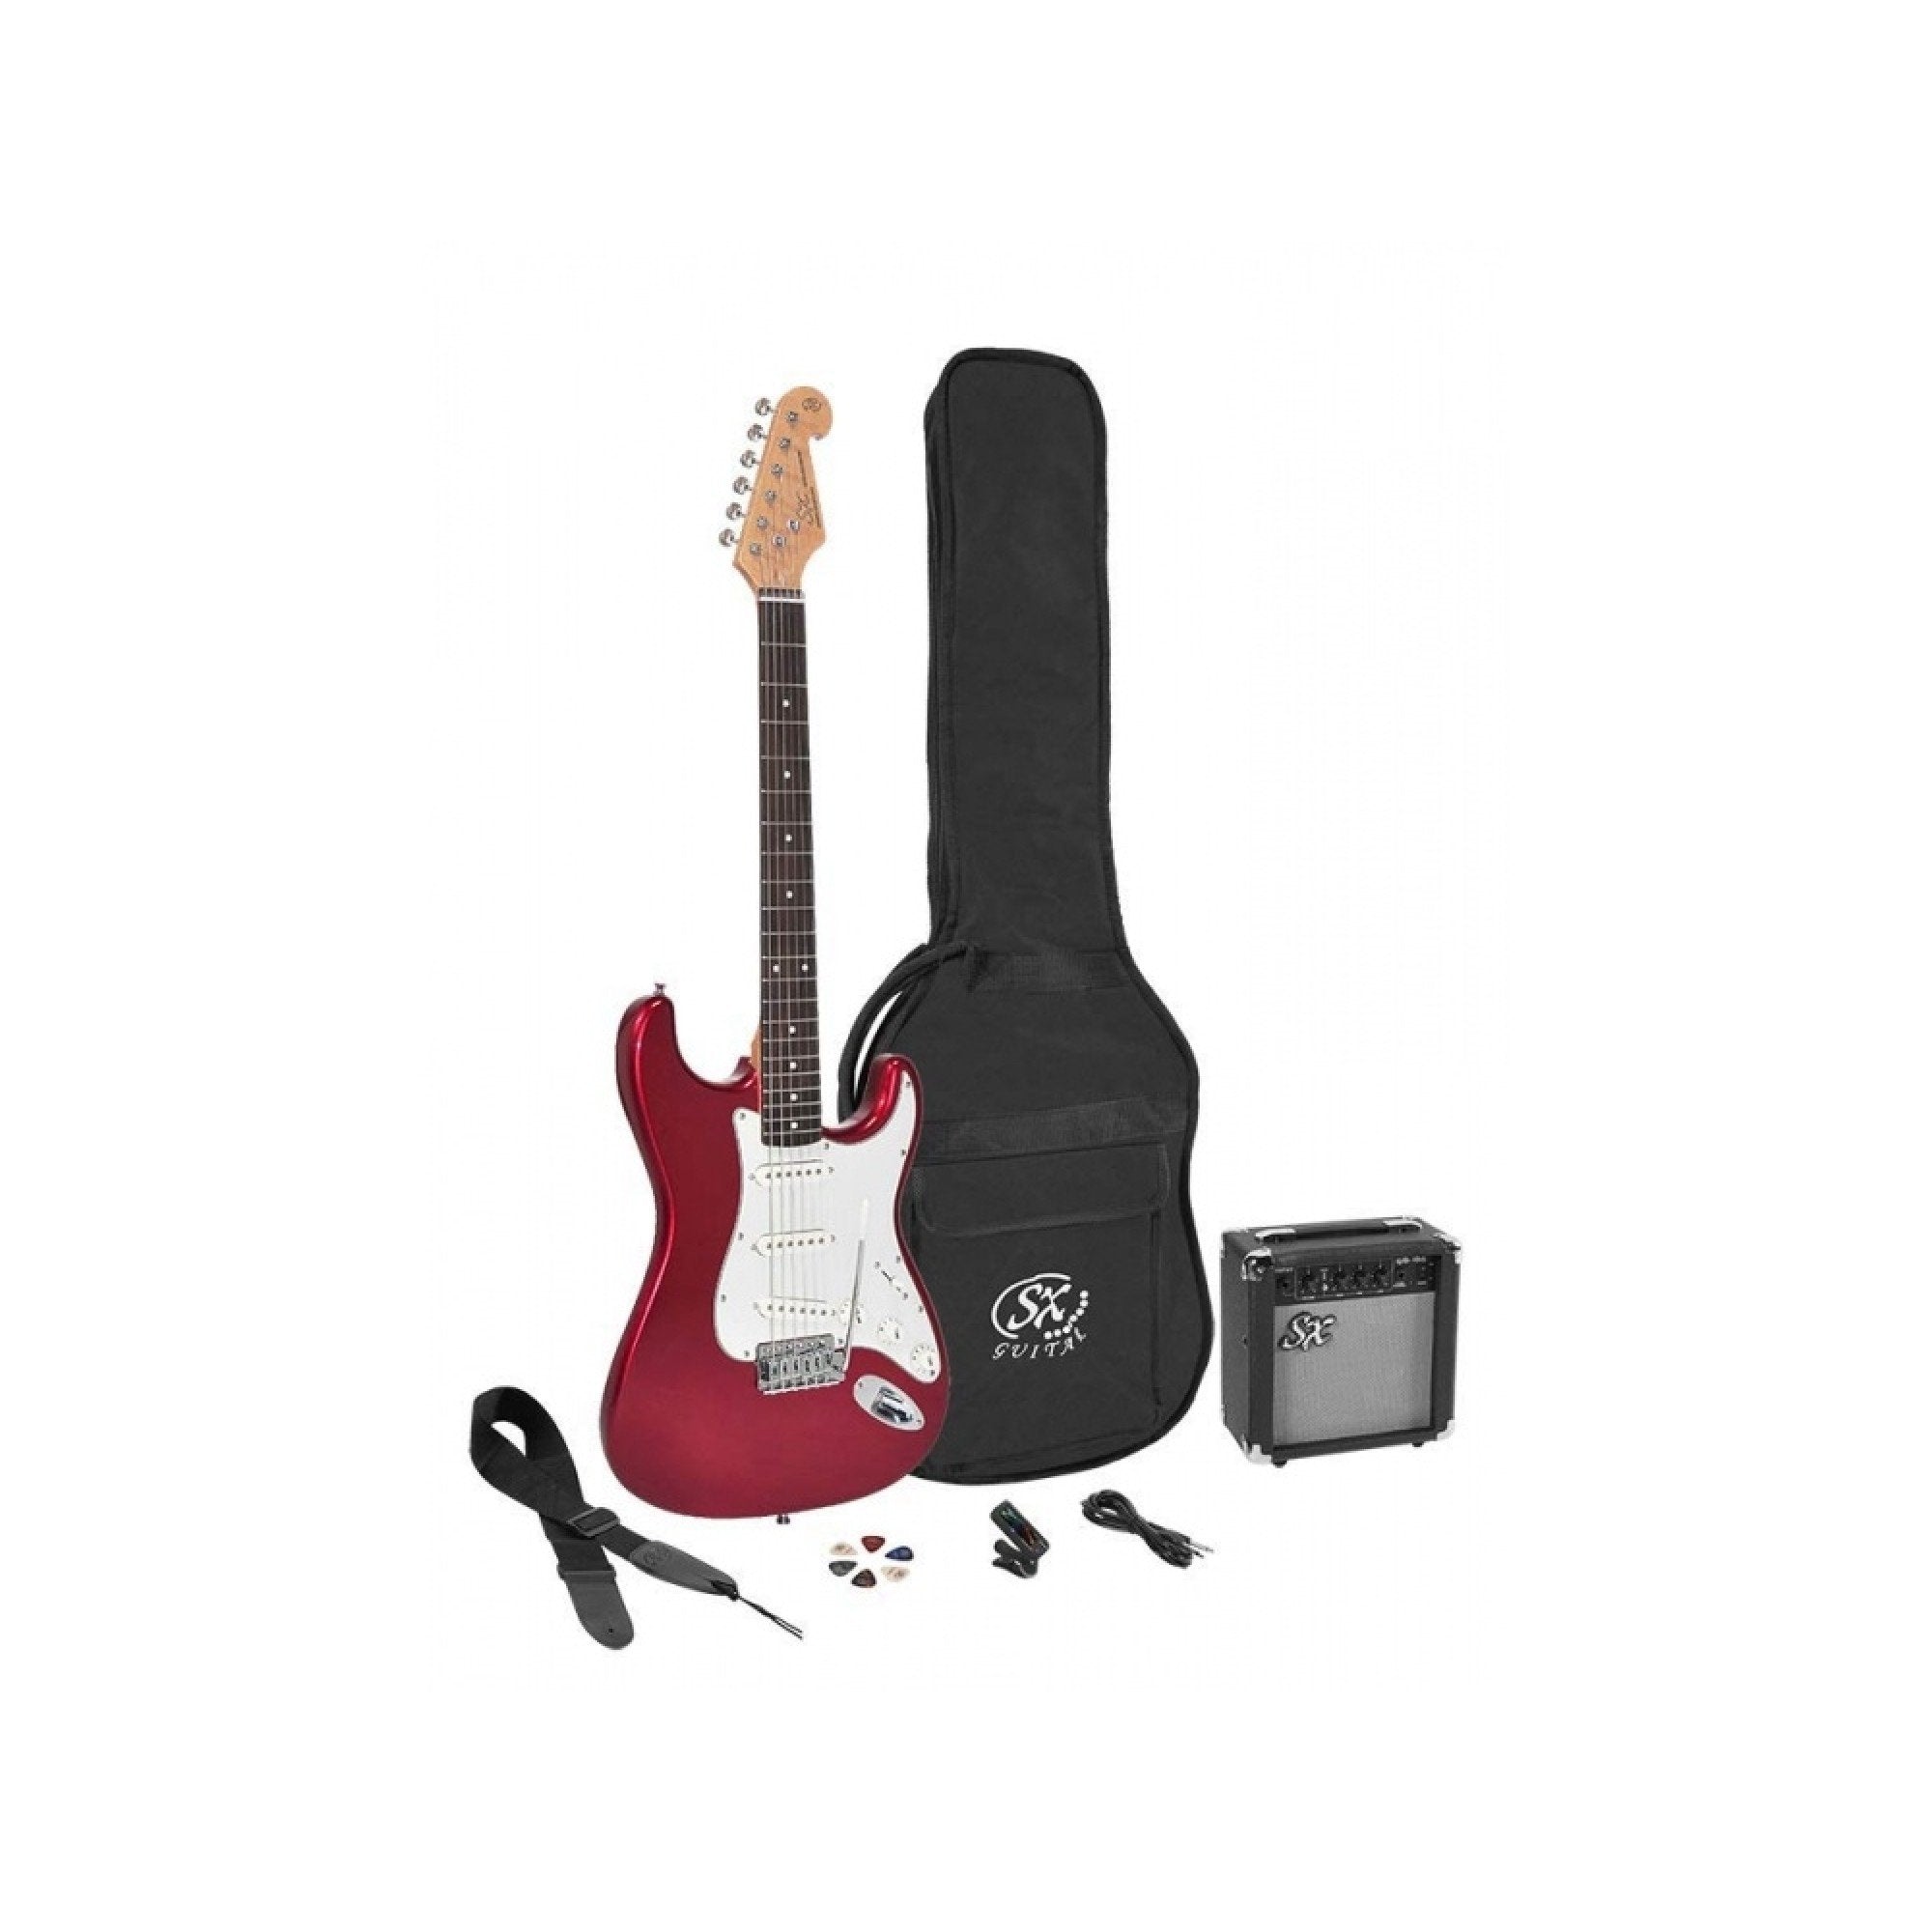 SX SE1SK Stratocaster Style Electric Guitar Pack - Candy Apple Red